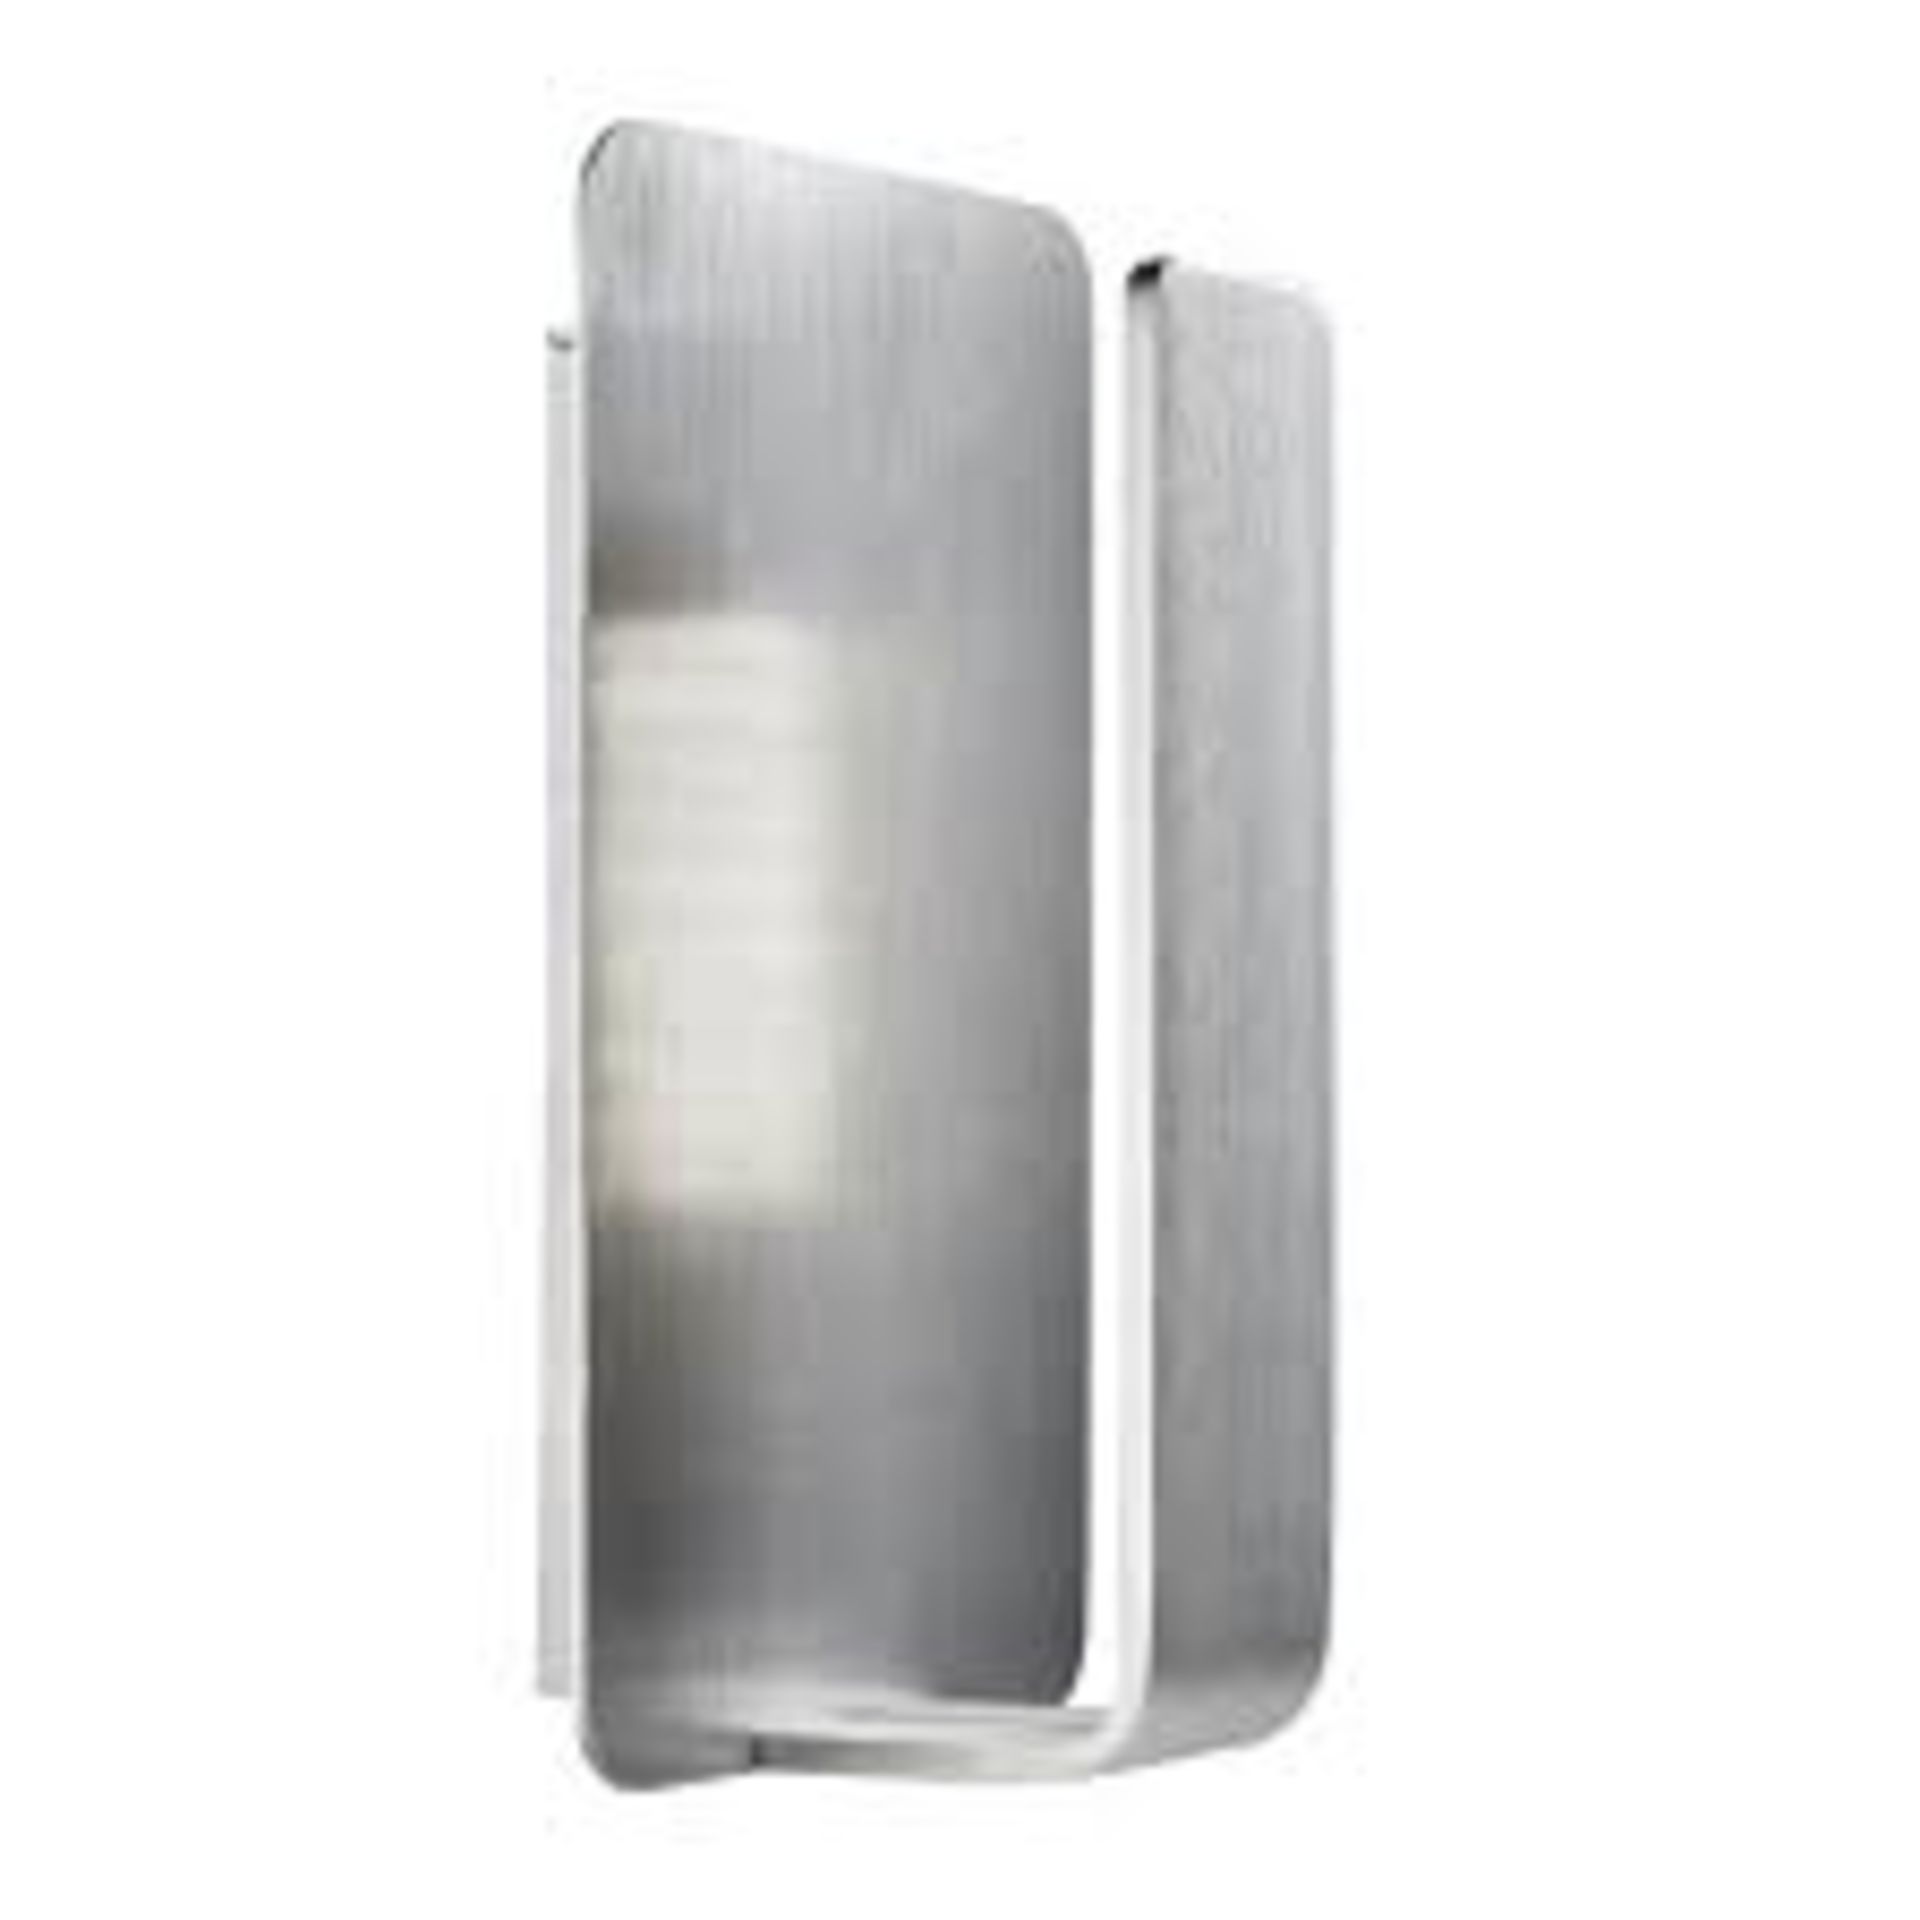 2 x Searchlight LED Wall Light in brushed Aluminium - Ref: 1898SI - New and Boxed - RRP: £70 - Image 3 of 4